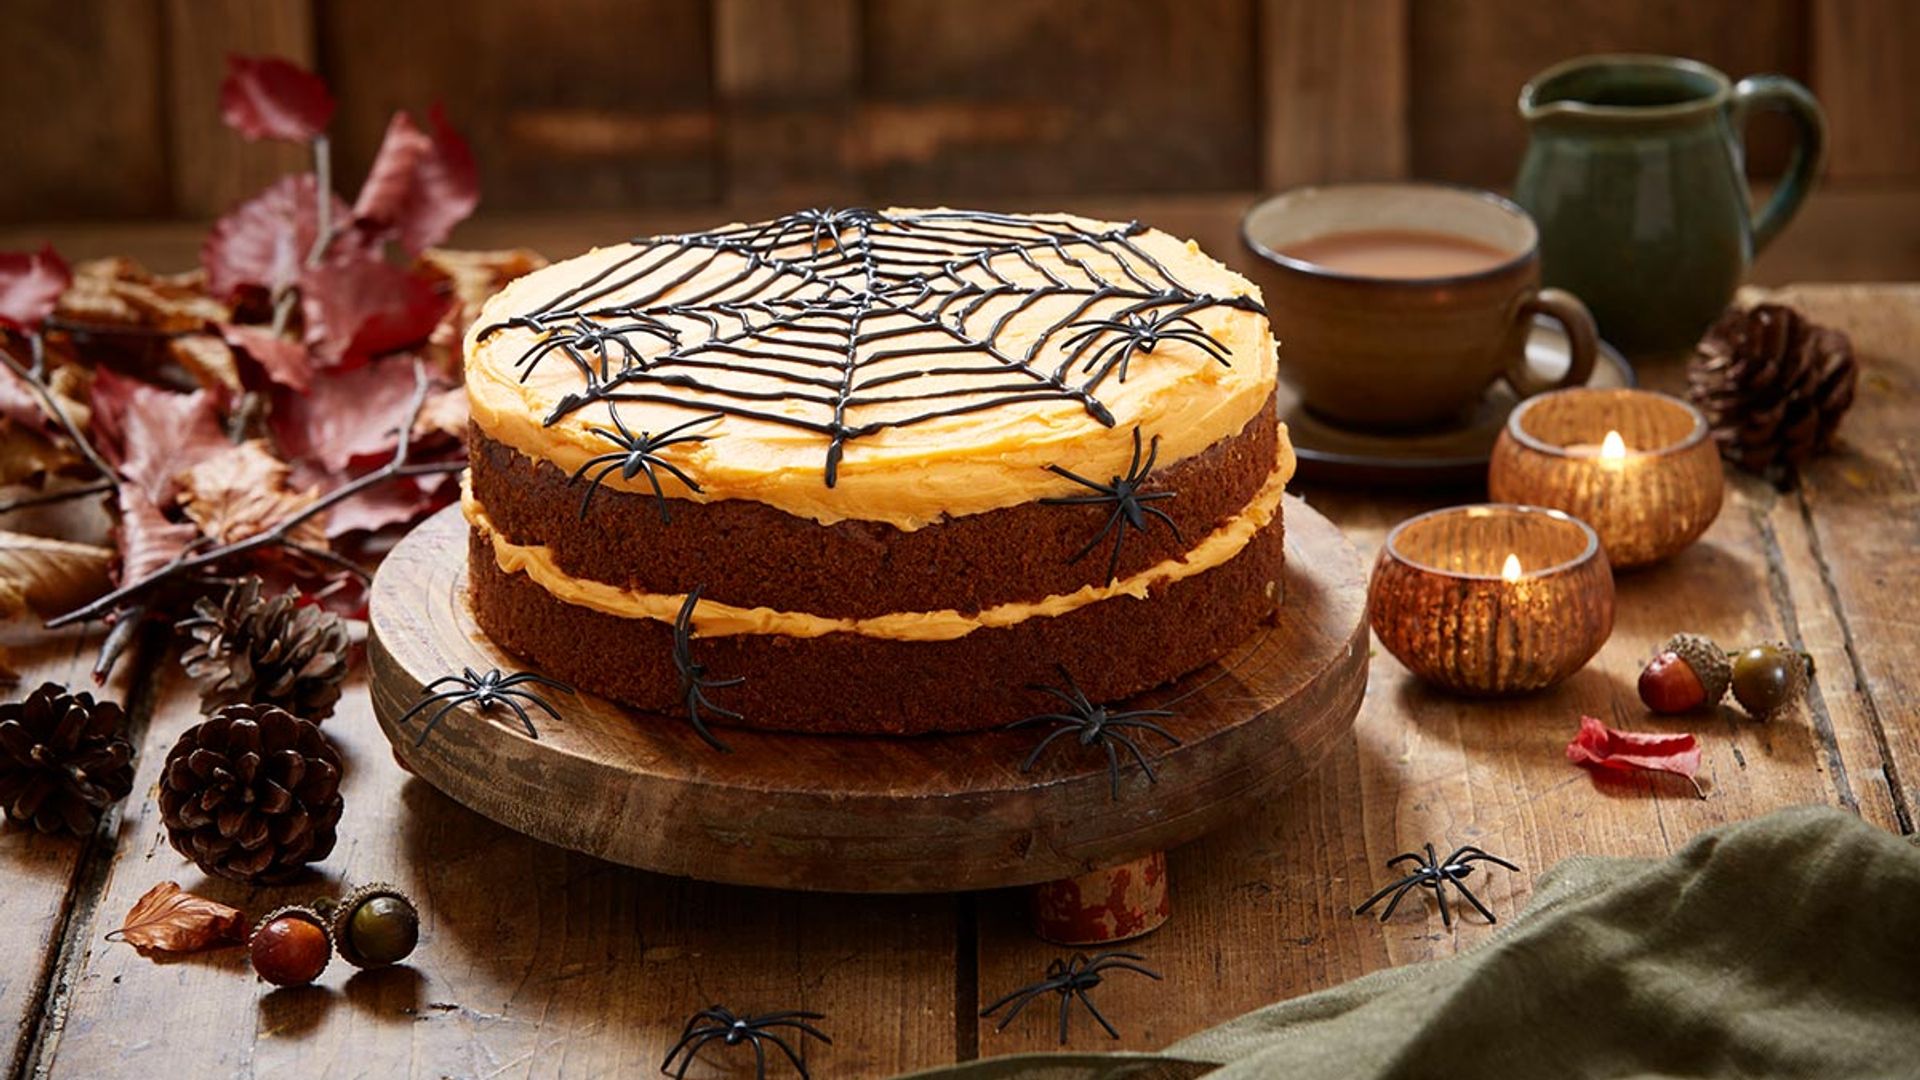 This creepy carrot cake recipe is the perfect Halloween showstopper!